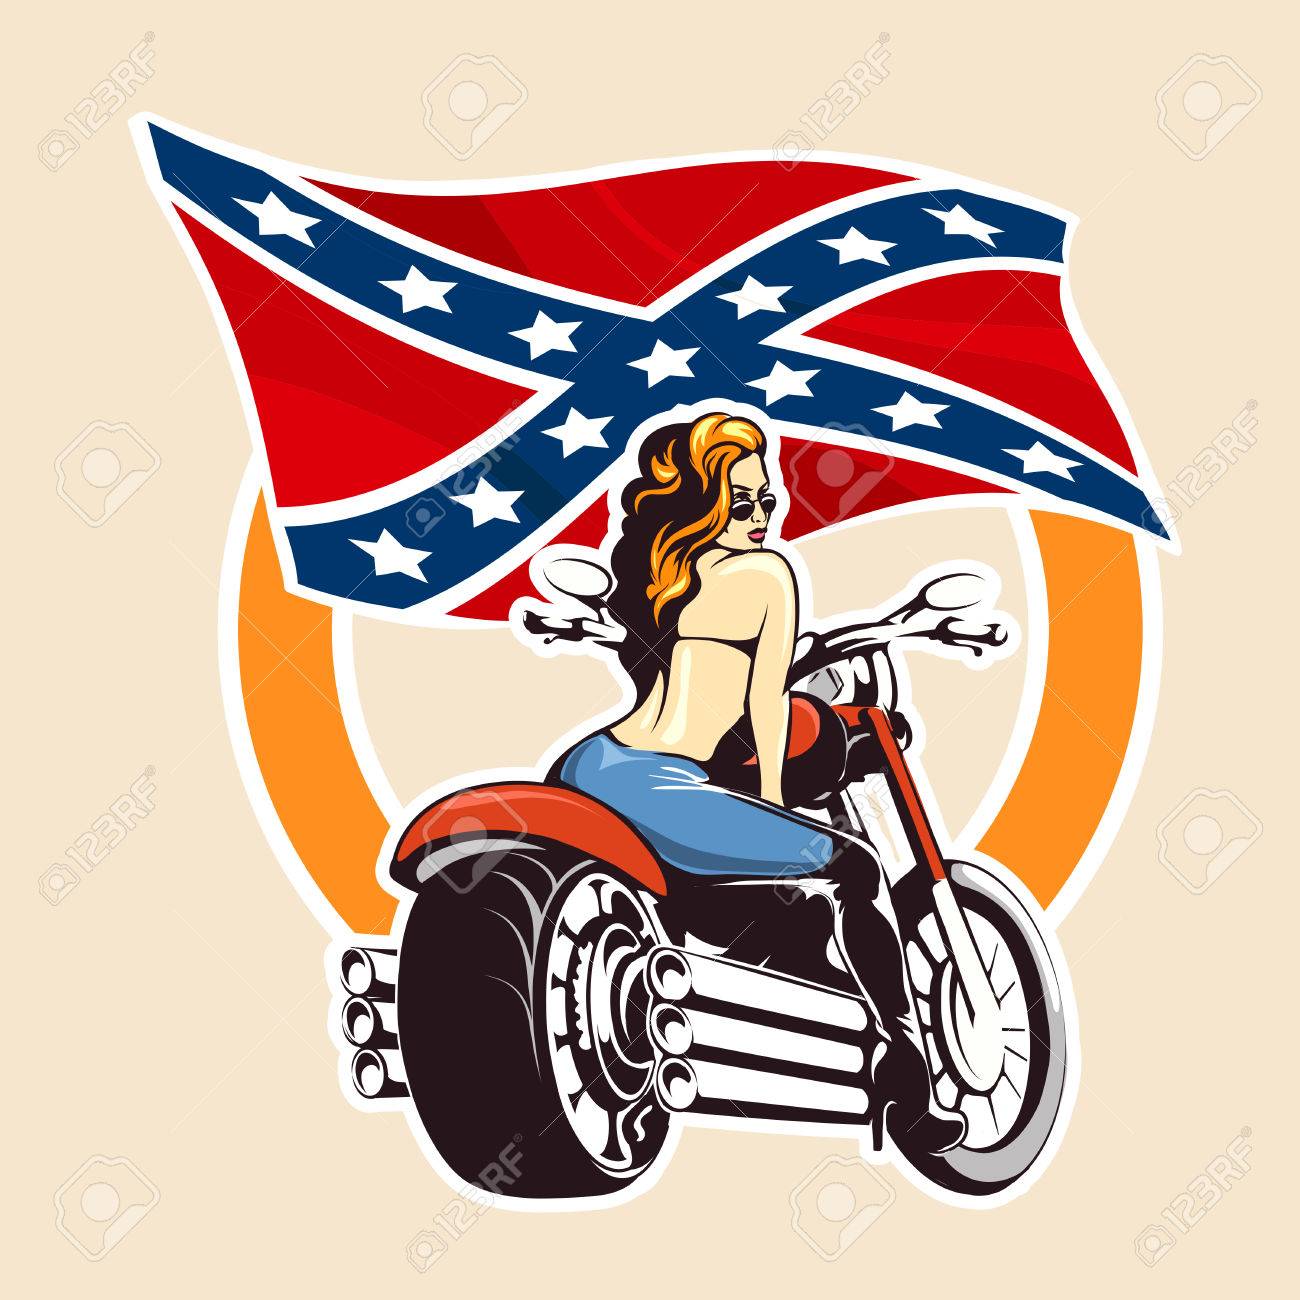 Sexy Girl ride a motorcycle against confederate flag. Bikers Club or bikers festival emblem or sticker.